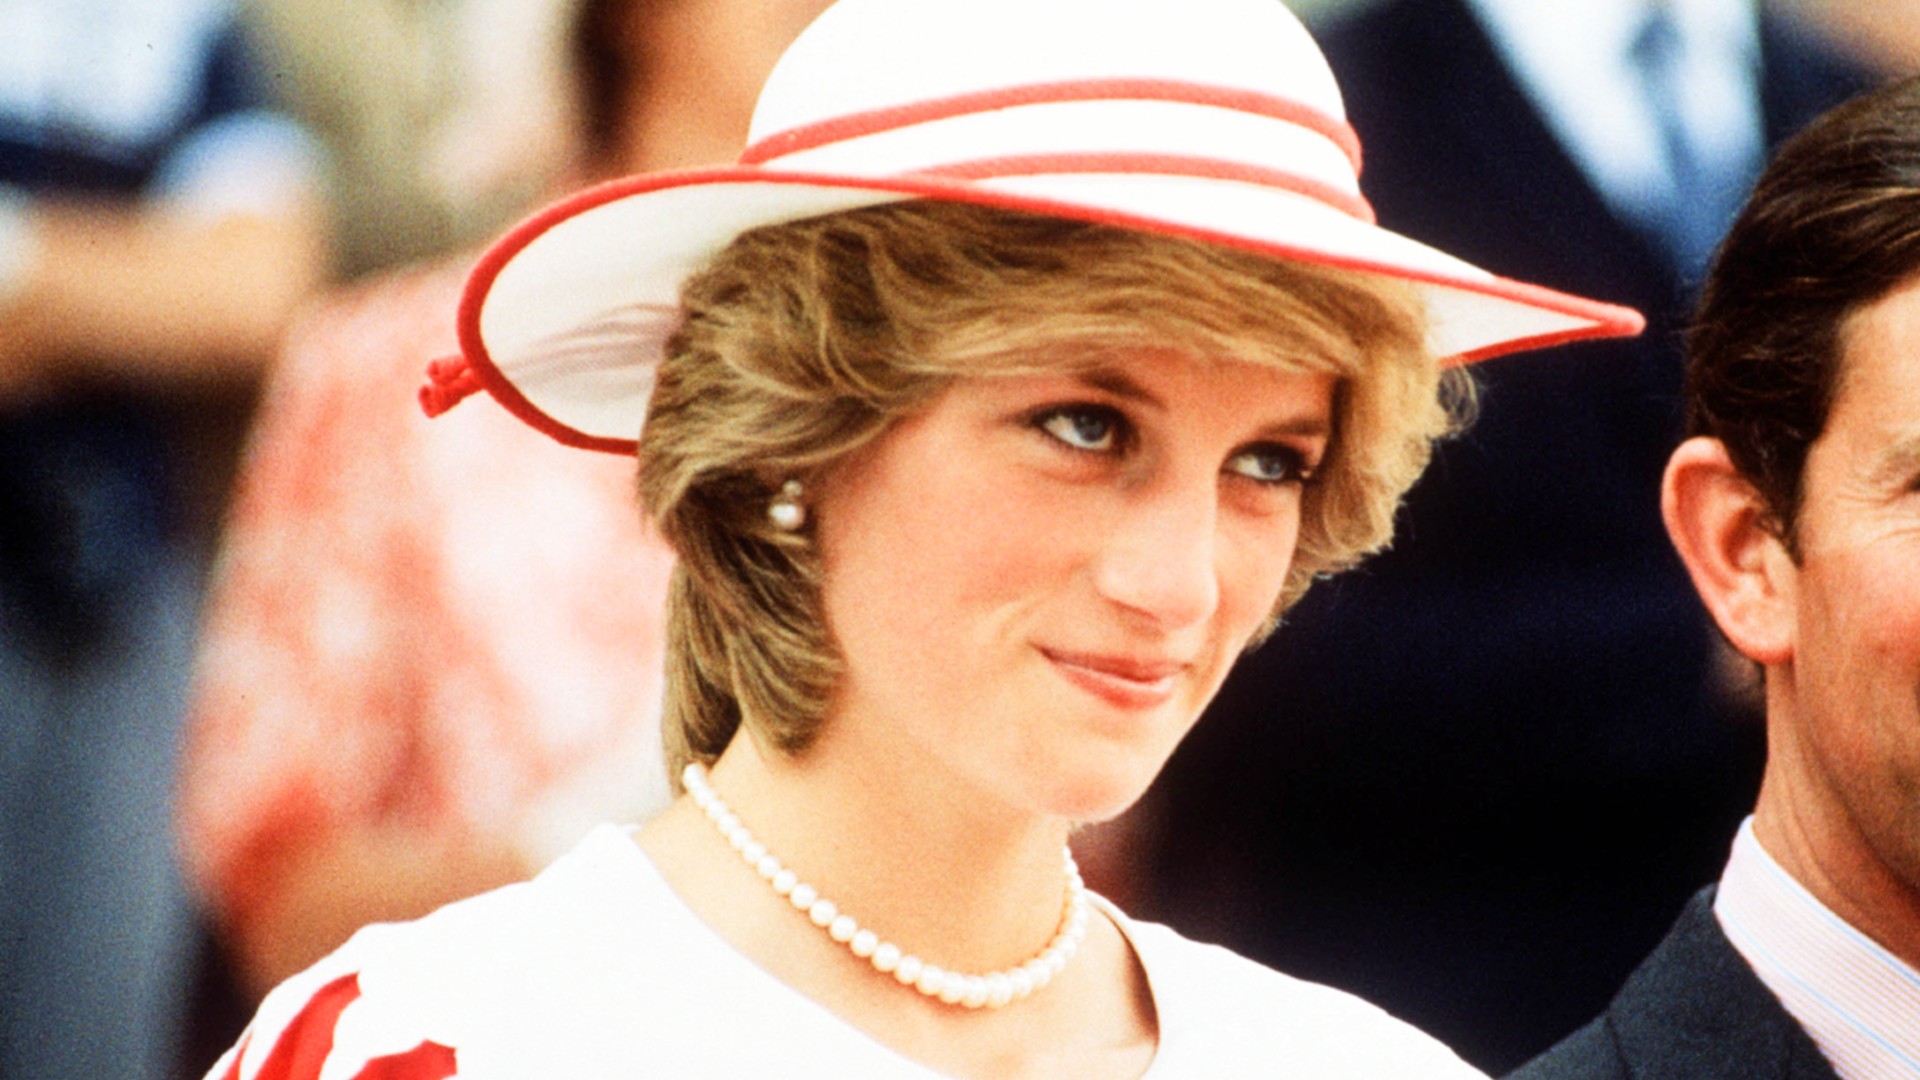 You Won't Believe These Heartwarming Acts of Kindness from Princess Diana